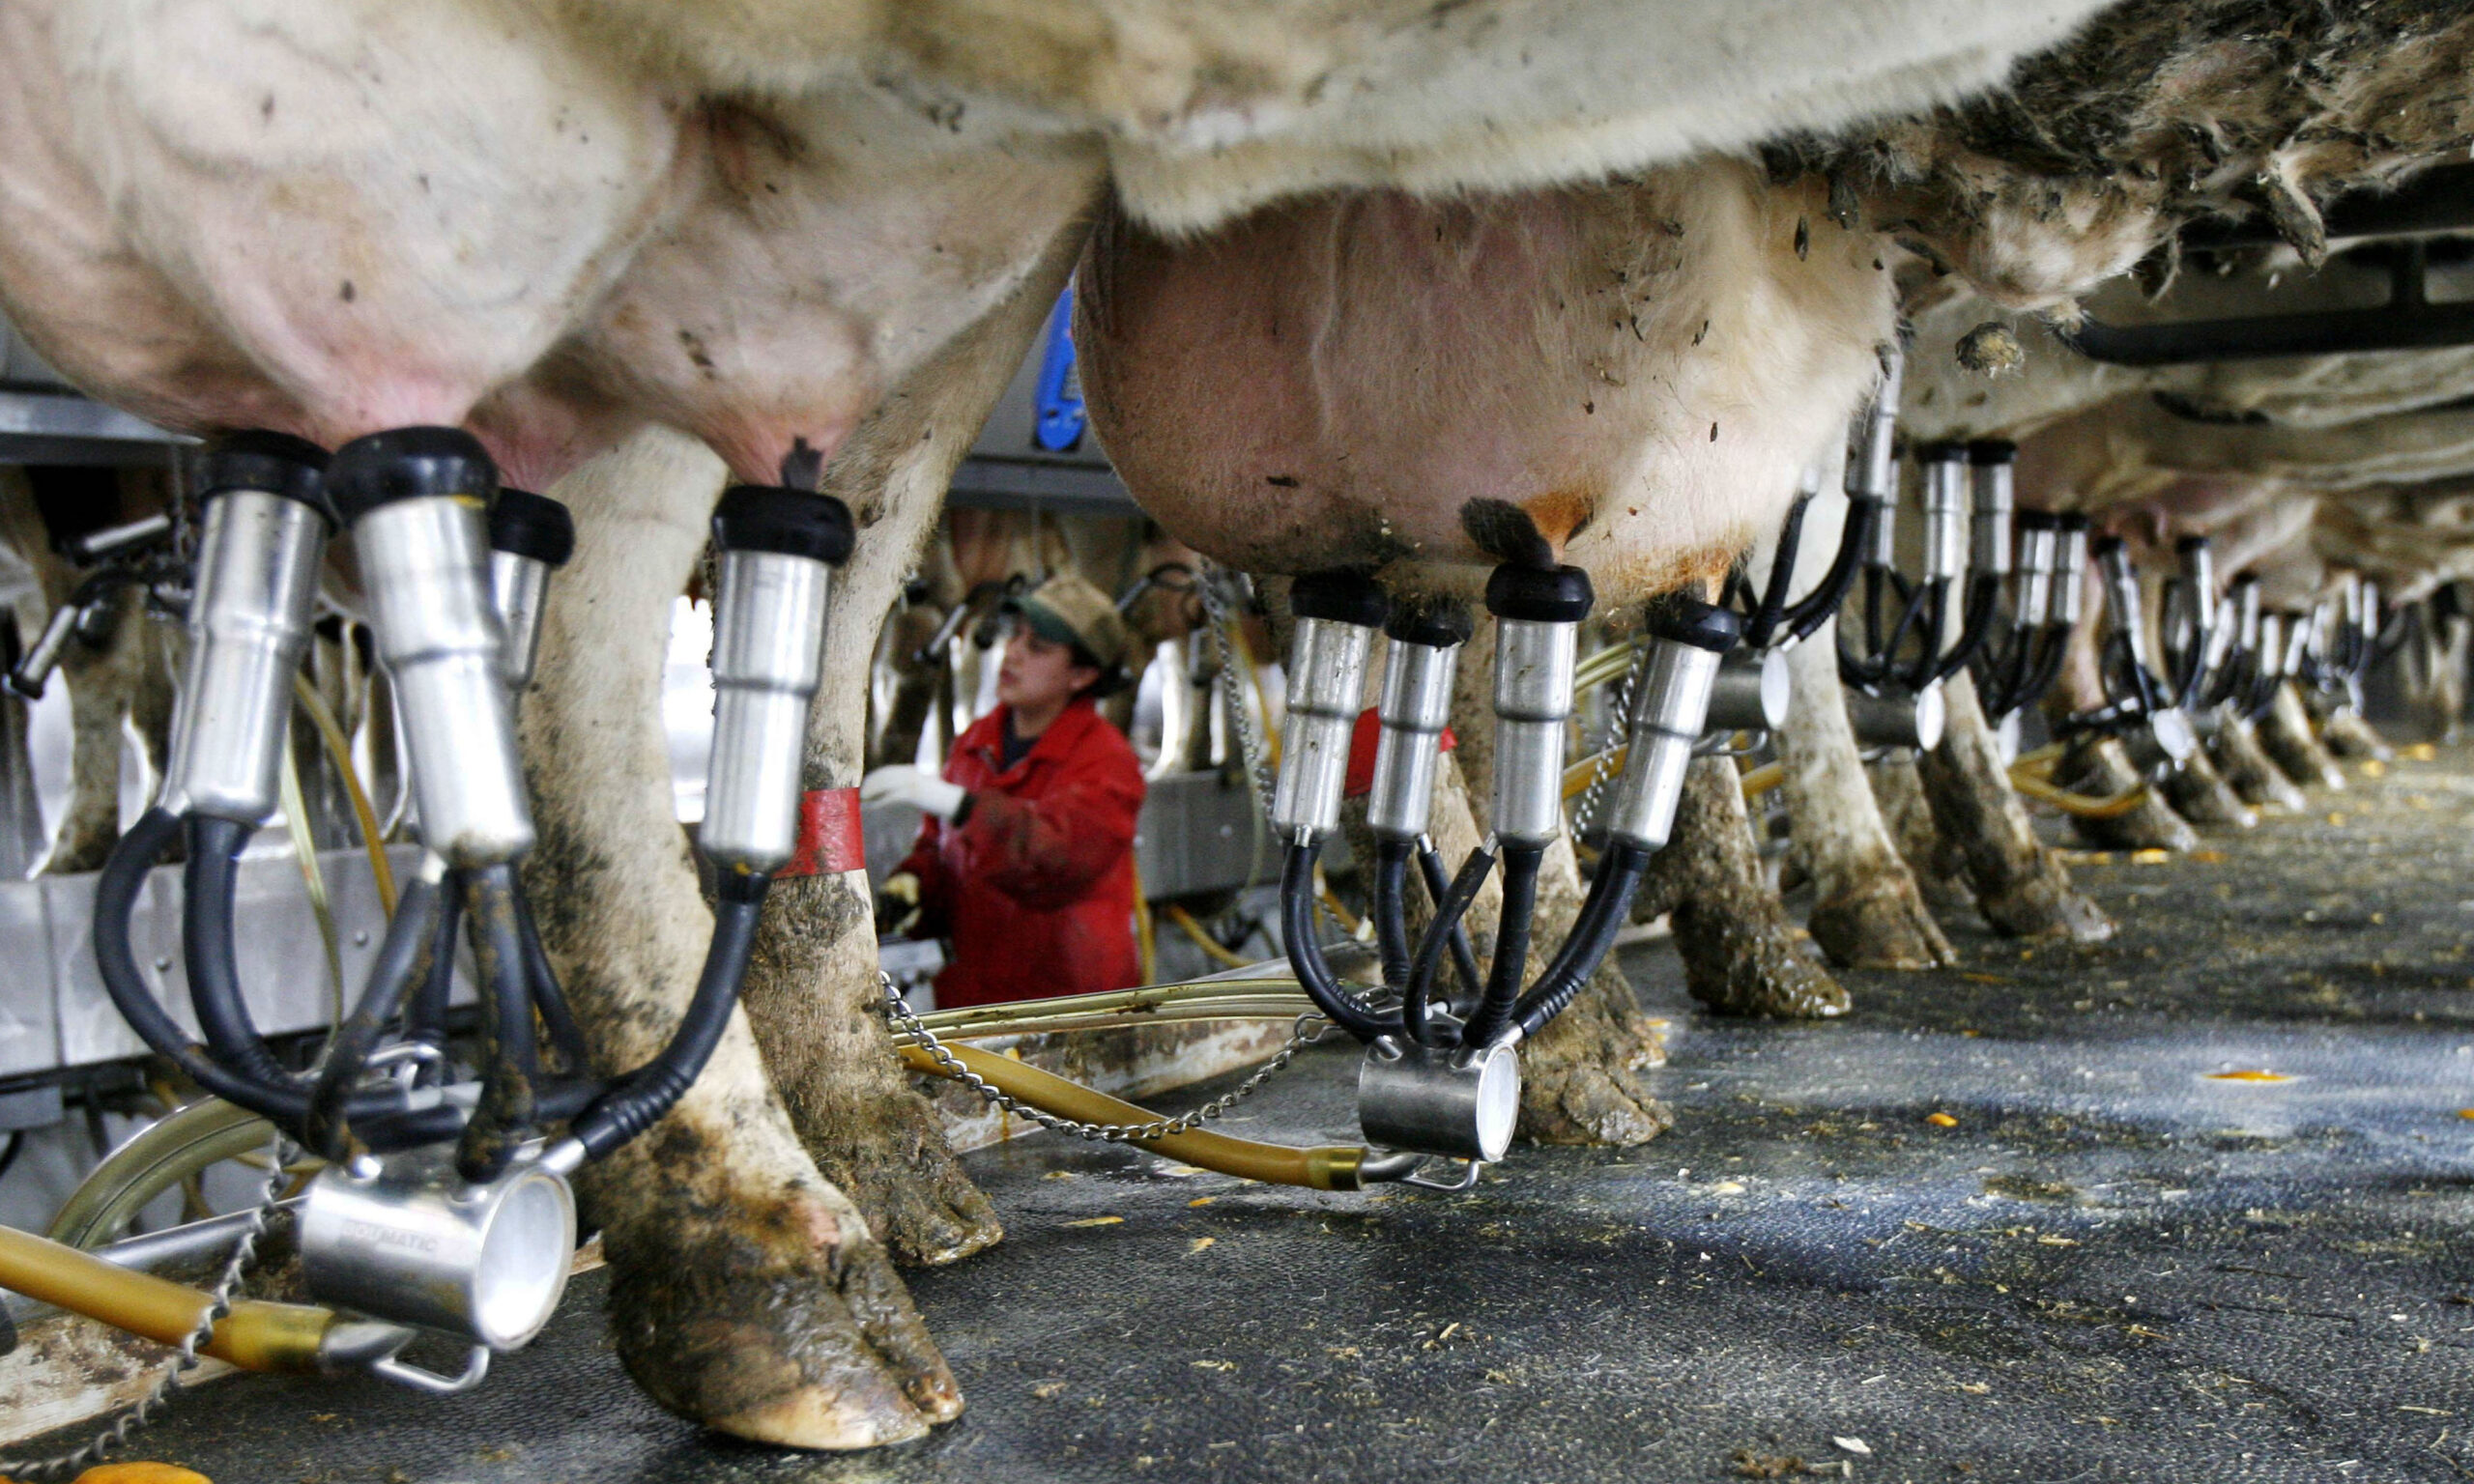 Wisconsin dairy leaders call on US Senate to fix labor shortages by changing immigration policy